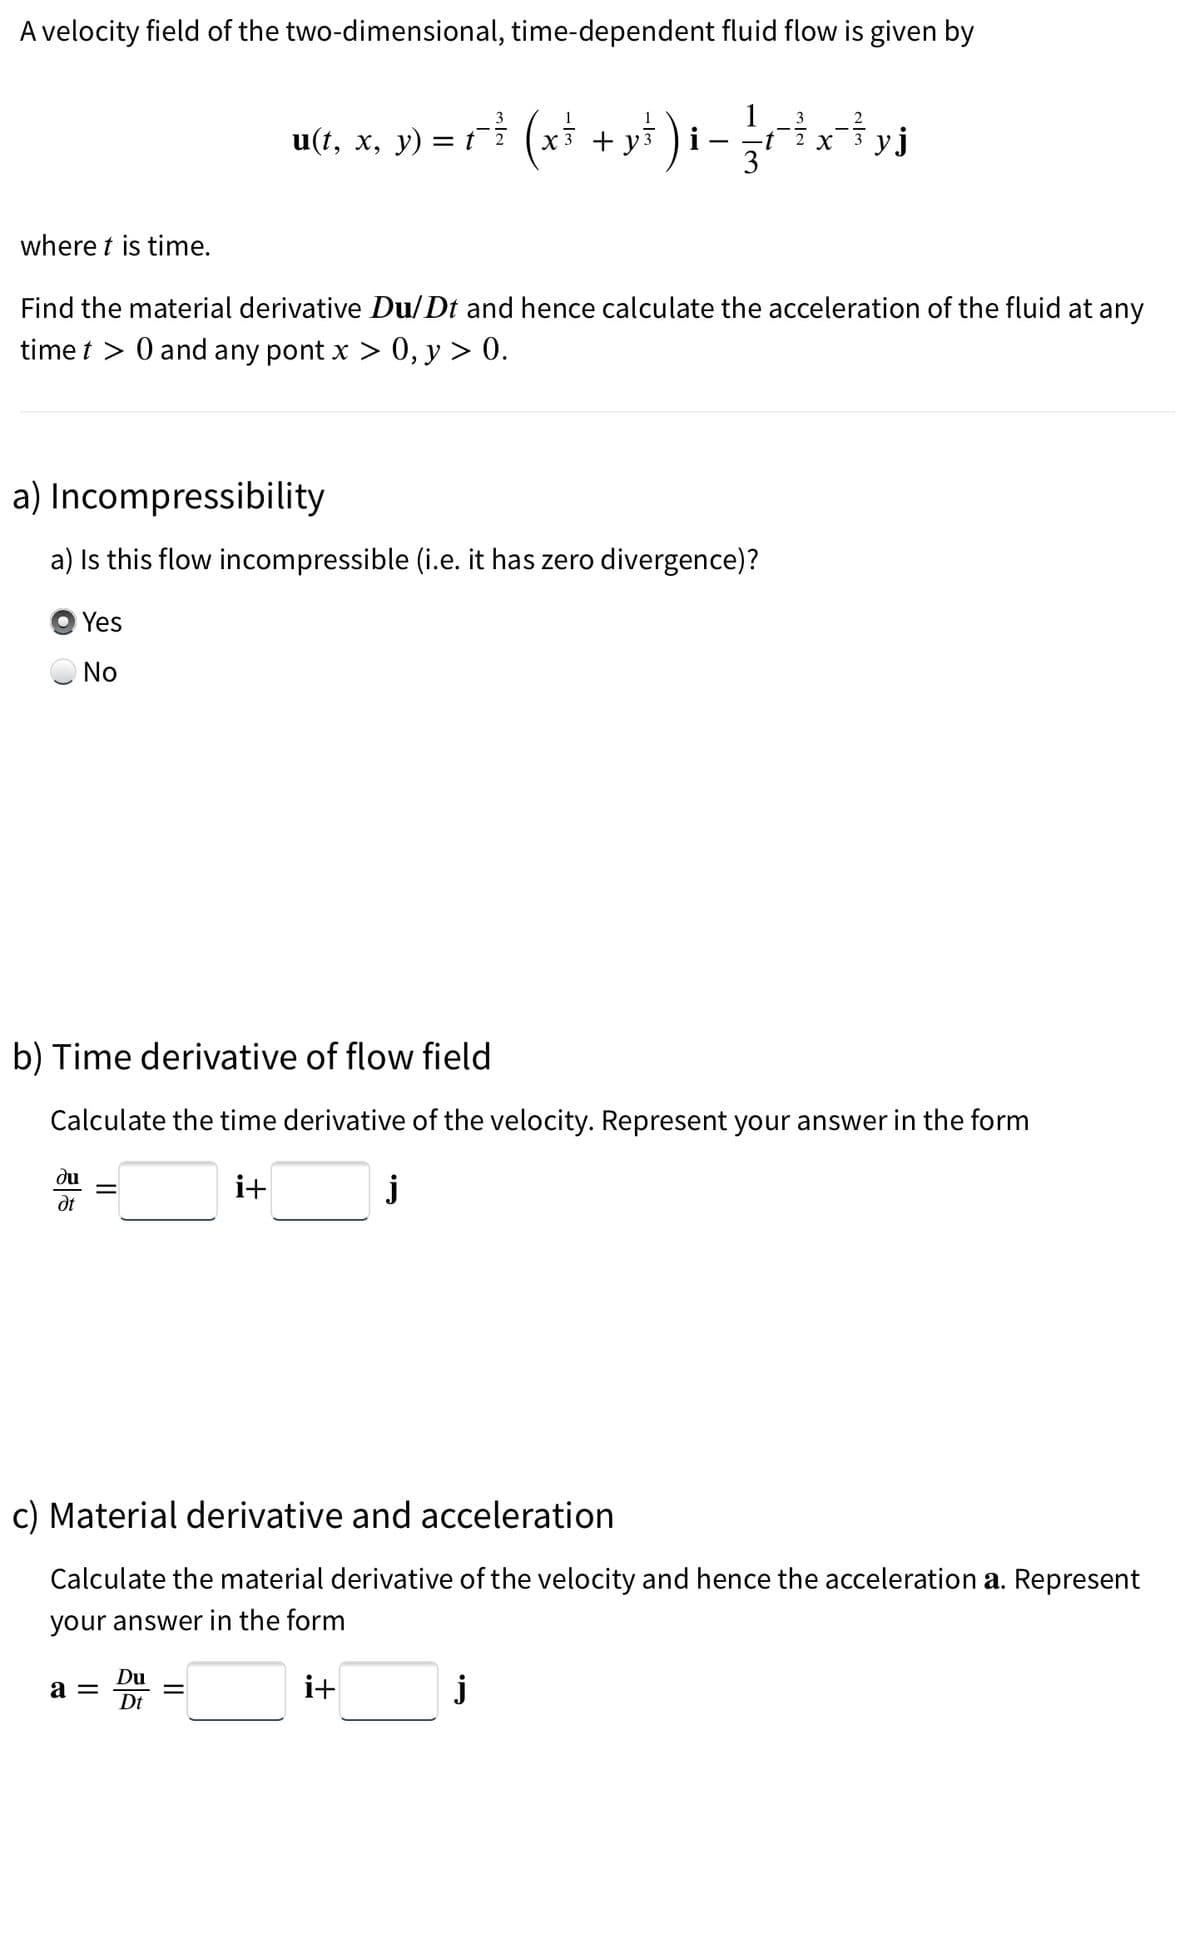 A velocity field of the two-dimensional, time-dependent fluid flow is given by
where t is time.
Find the material derivative Du/Dt and hence calculate the acceleration of the fluid at any
time t > 0 and any pont x > 0, y > 0.
a) Incompressibility
a) Is this flow incompressible (i.e. it has zero divergence)?
Yes
No
ди
Ət
b) Time derivative of flow field
Calculate the time derivative of the velocity. Represent your answer in the form
i+
||
3
3
u(t, x, y) =r? (x² + y² ) i− {etxtyj
X уј
3
a =
c) Material derivative and acceleration
Calculate the material derivative of the velocity and hence the acceleration a. Represent
your answer in the form
Du
Dt
||
j
i+
j